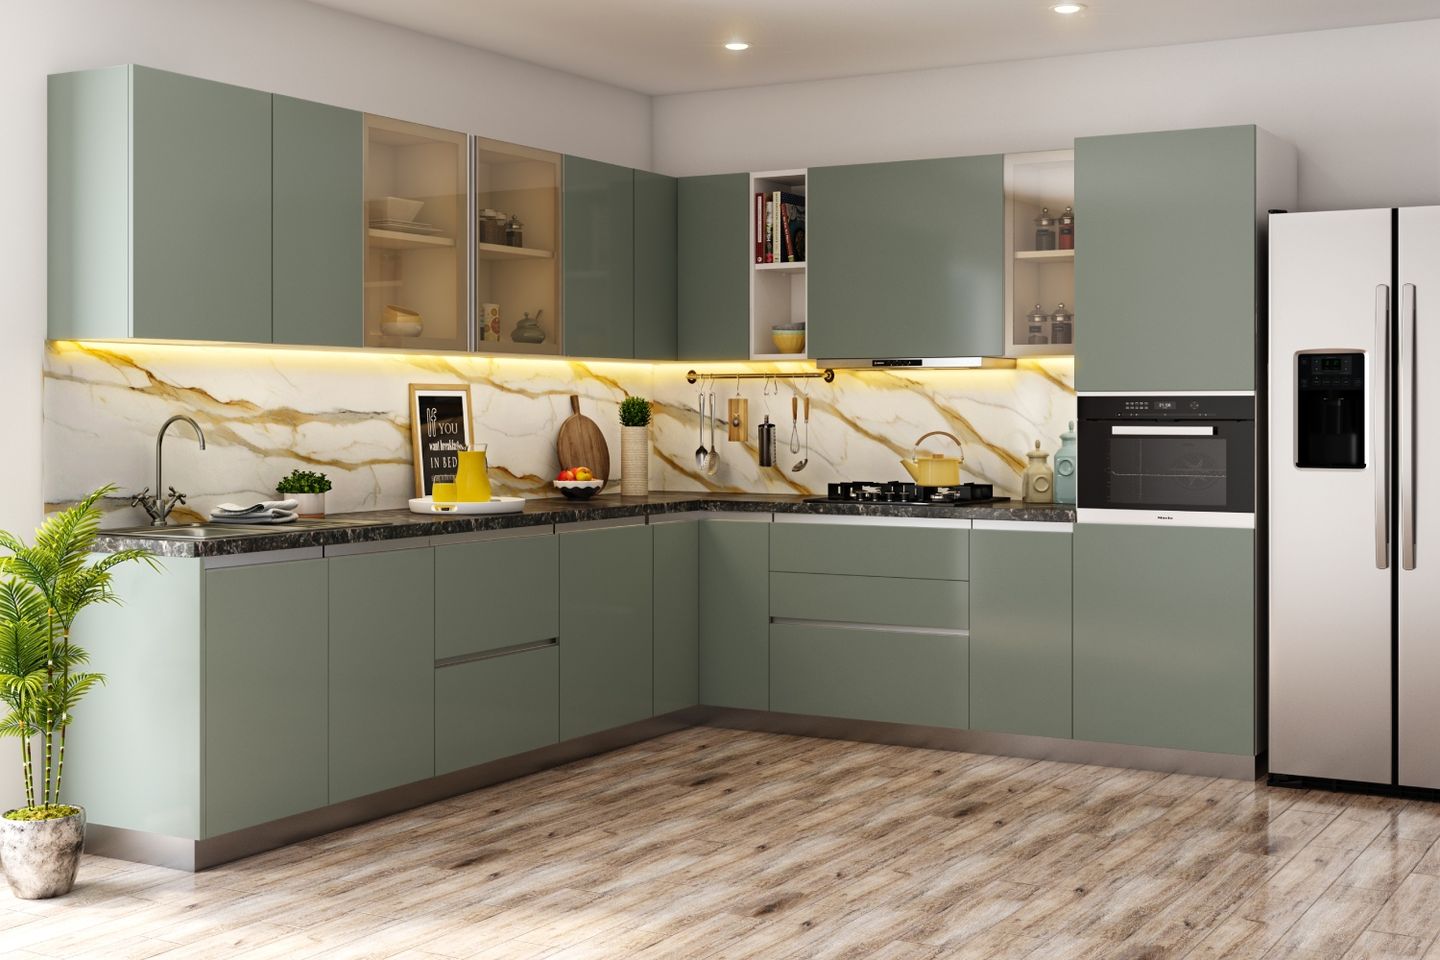 L Shaped Modular Kitchen Design With Pastel Green Cabinets - Livspace